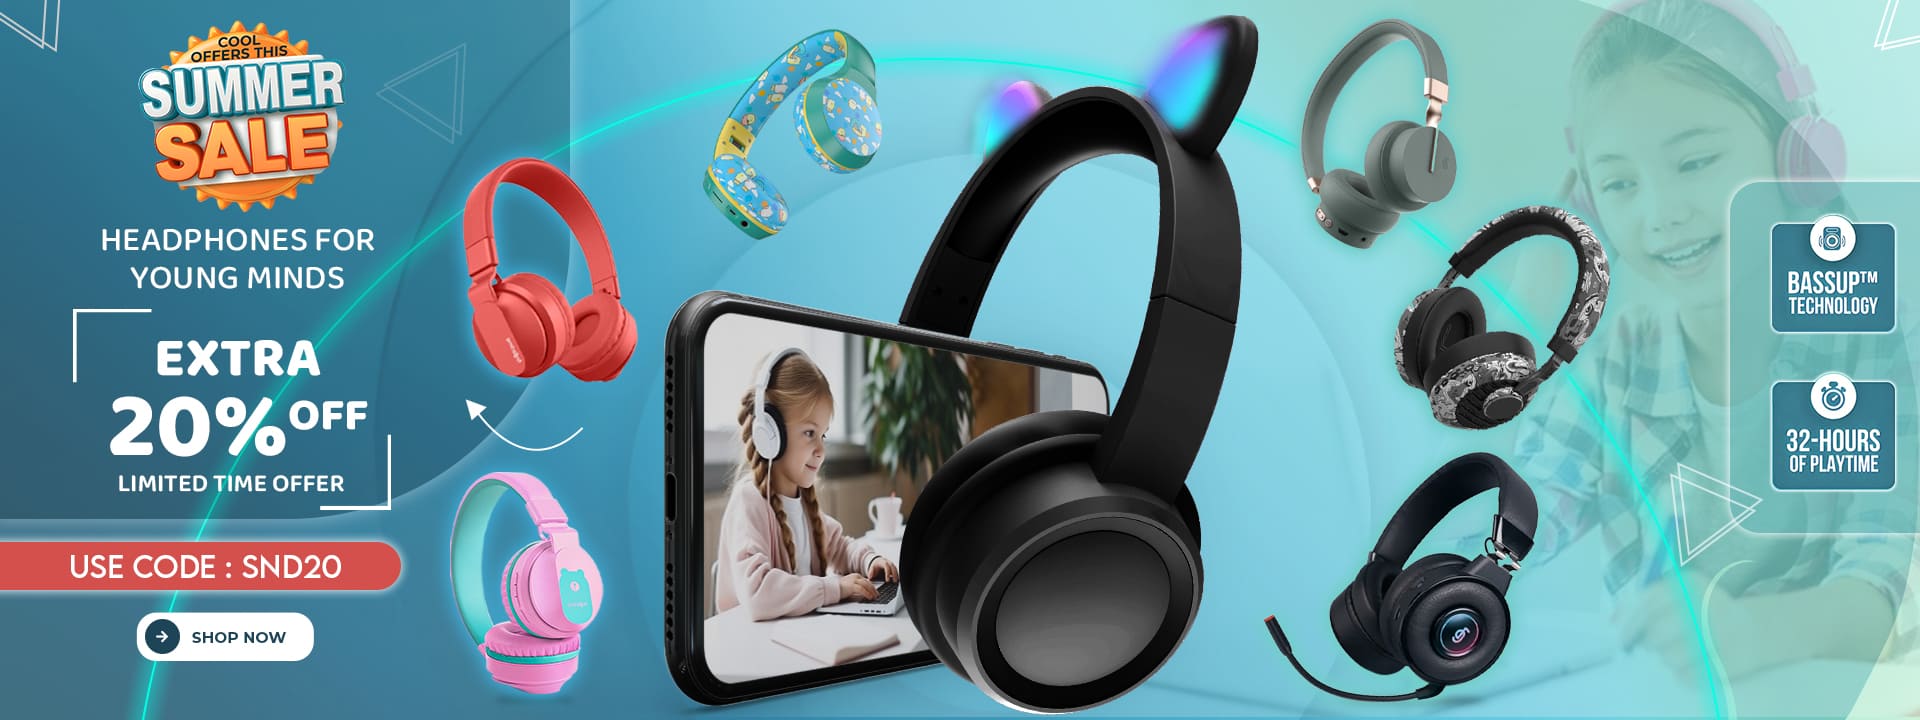 Headphones for Young Minds